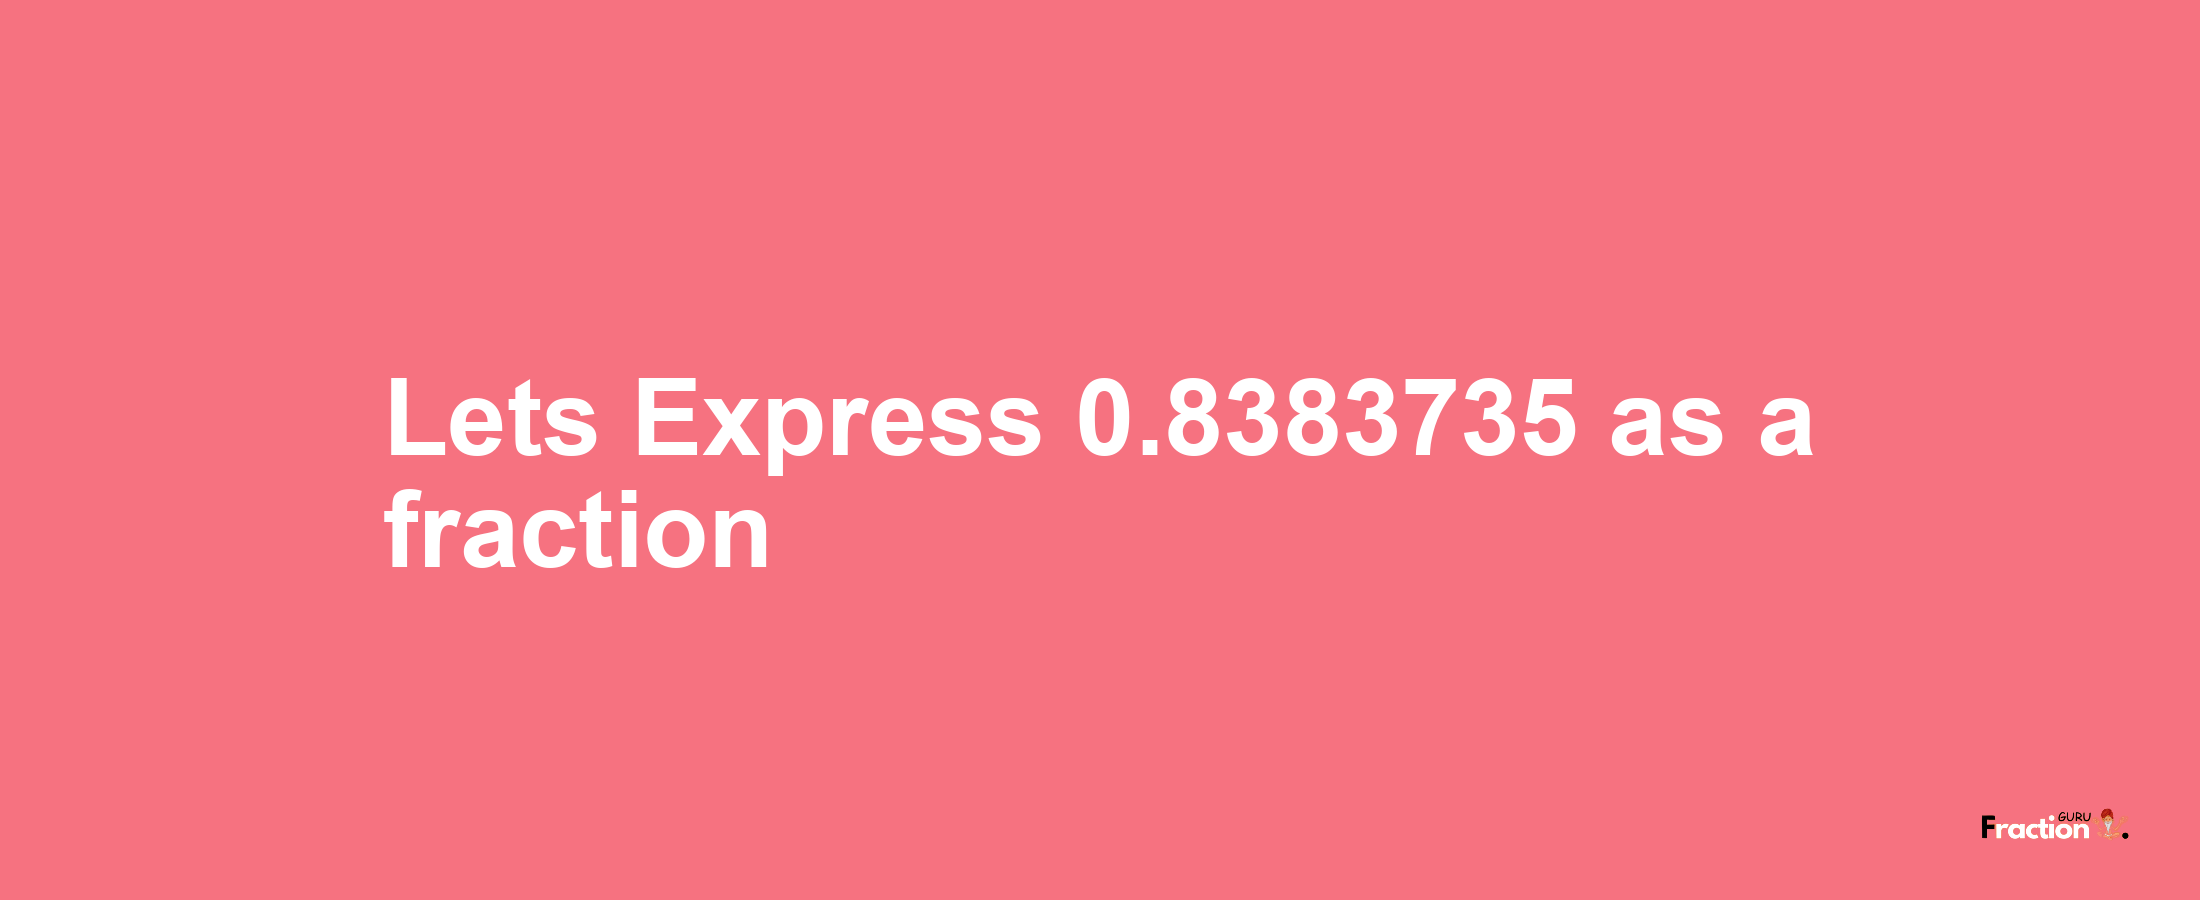 Lets Express 0.8383735 as afraction